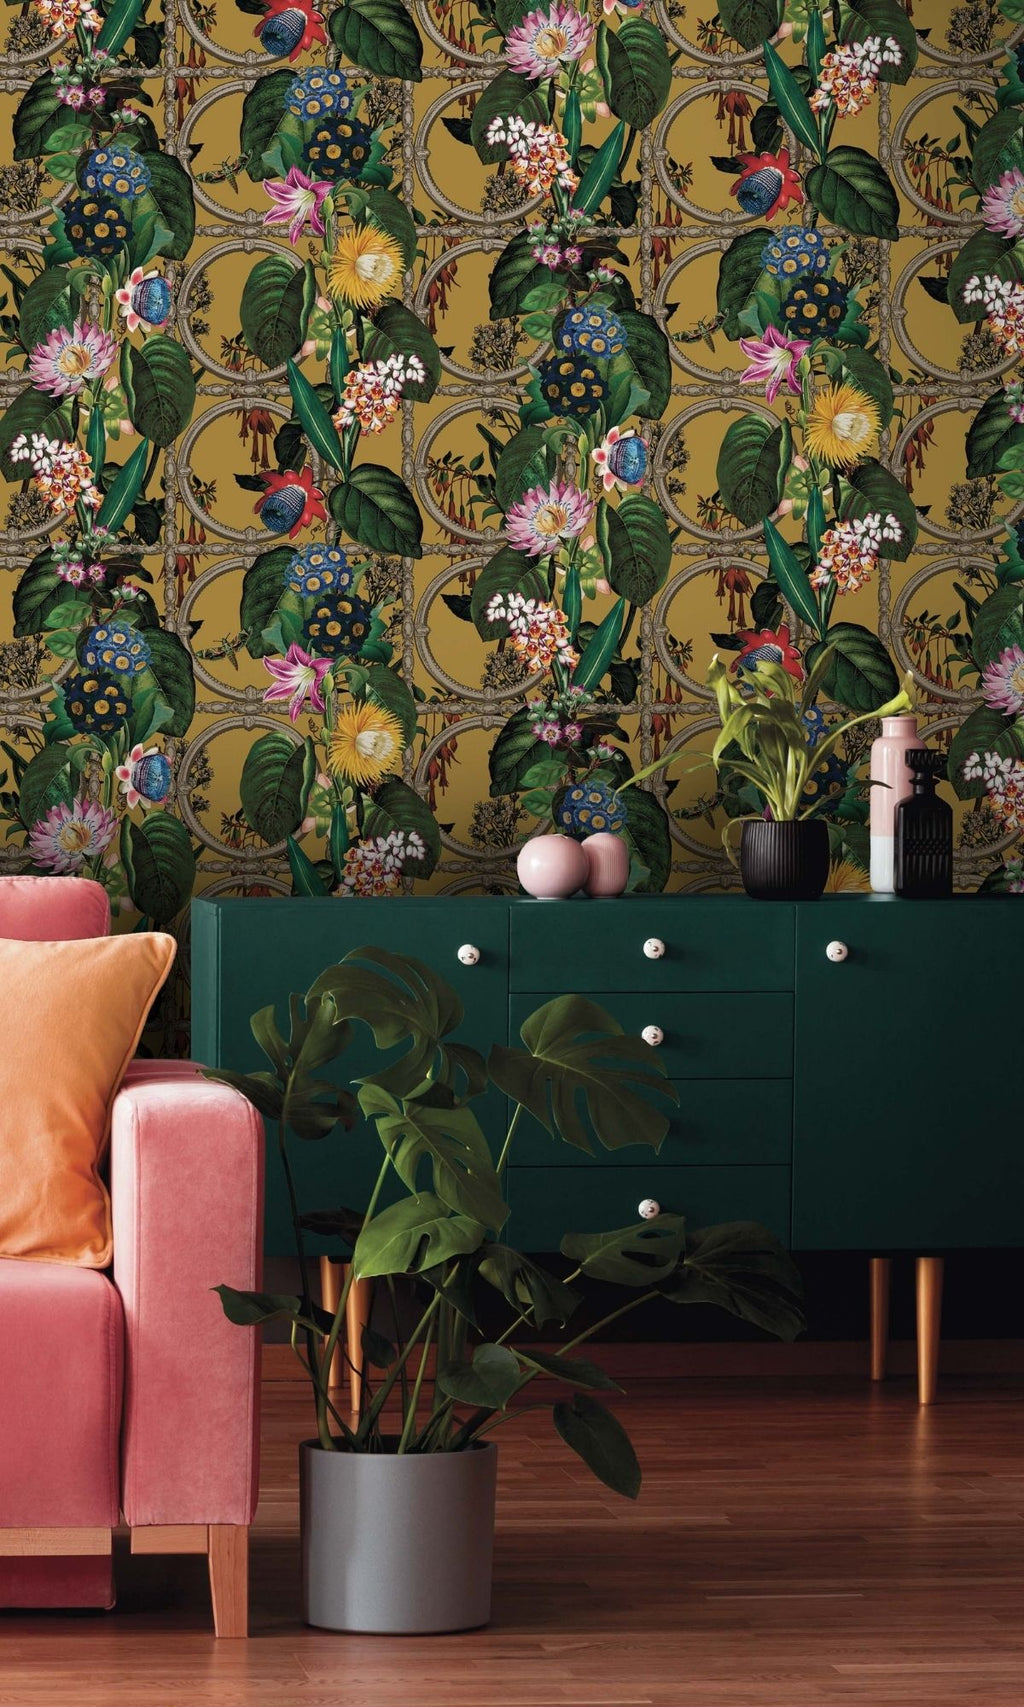 Ochre Metallic Bold Flowers and Leaves Floral Wallpaper R7577